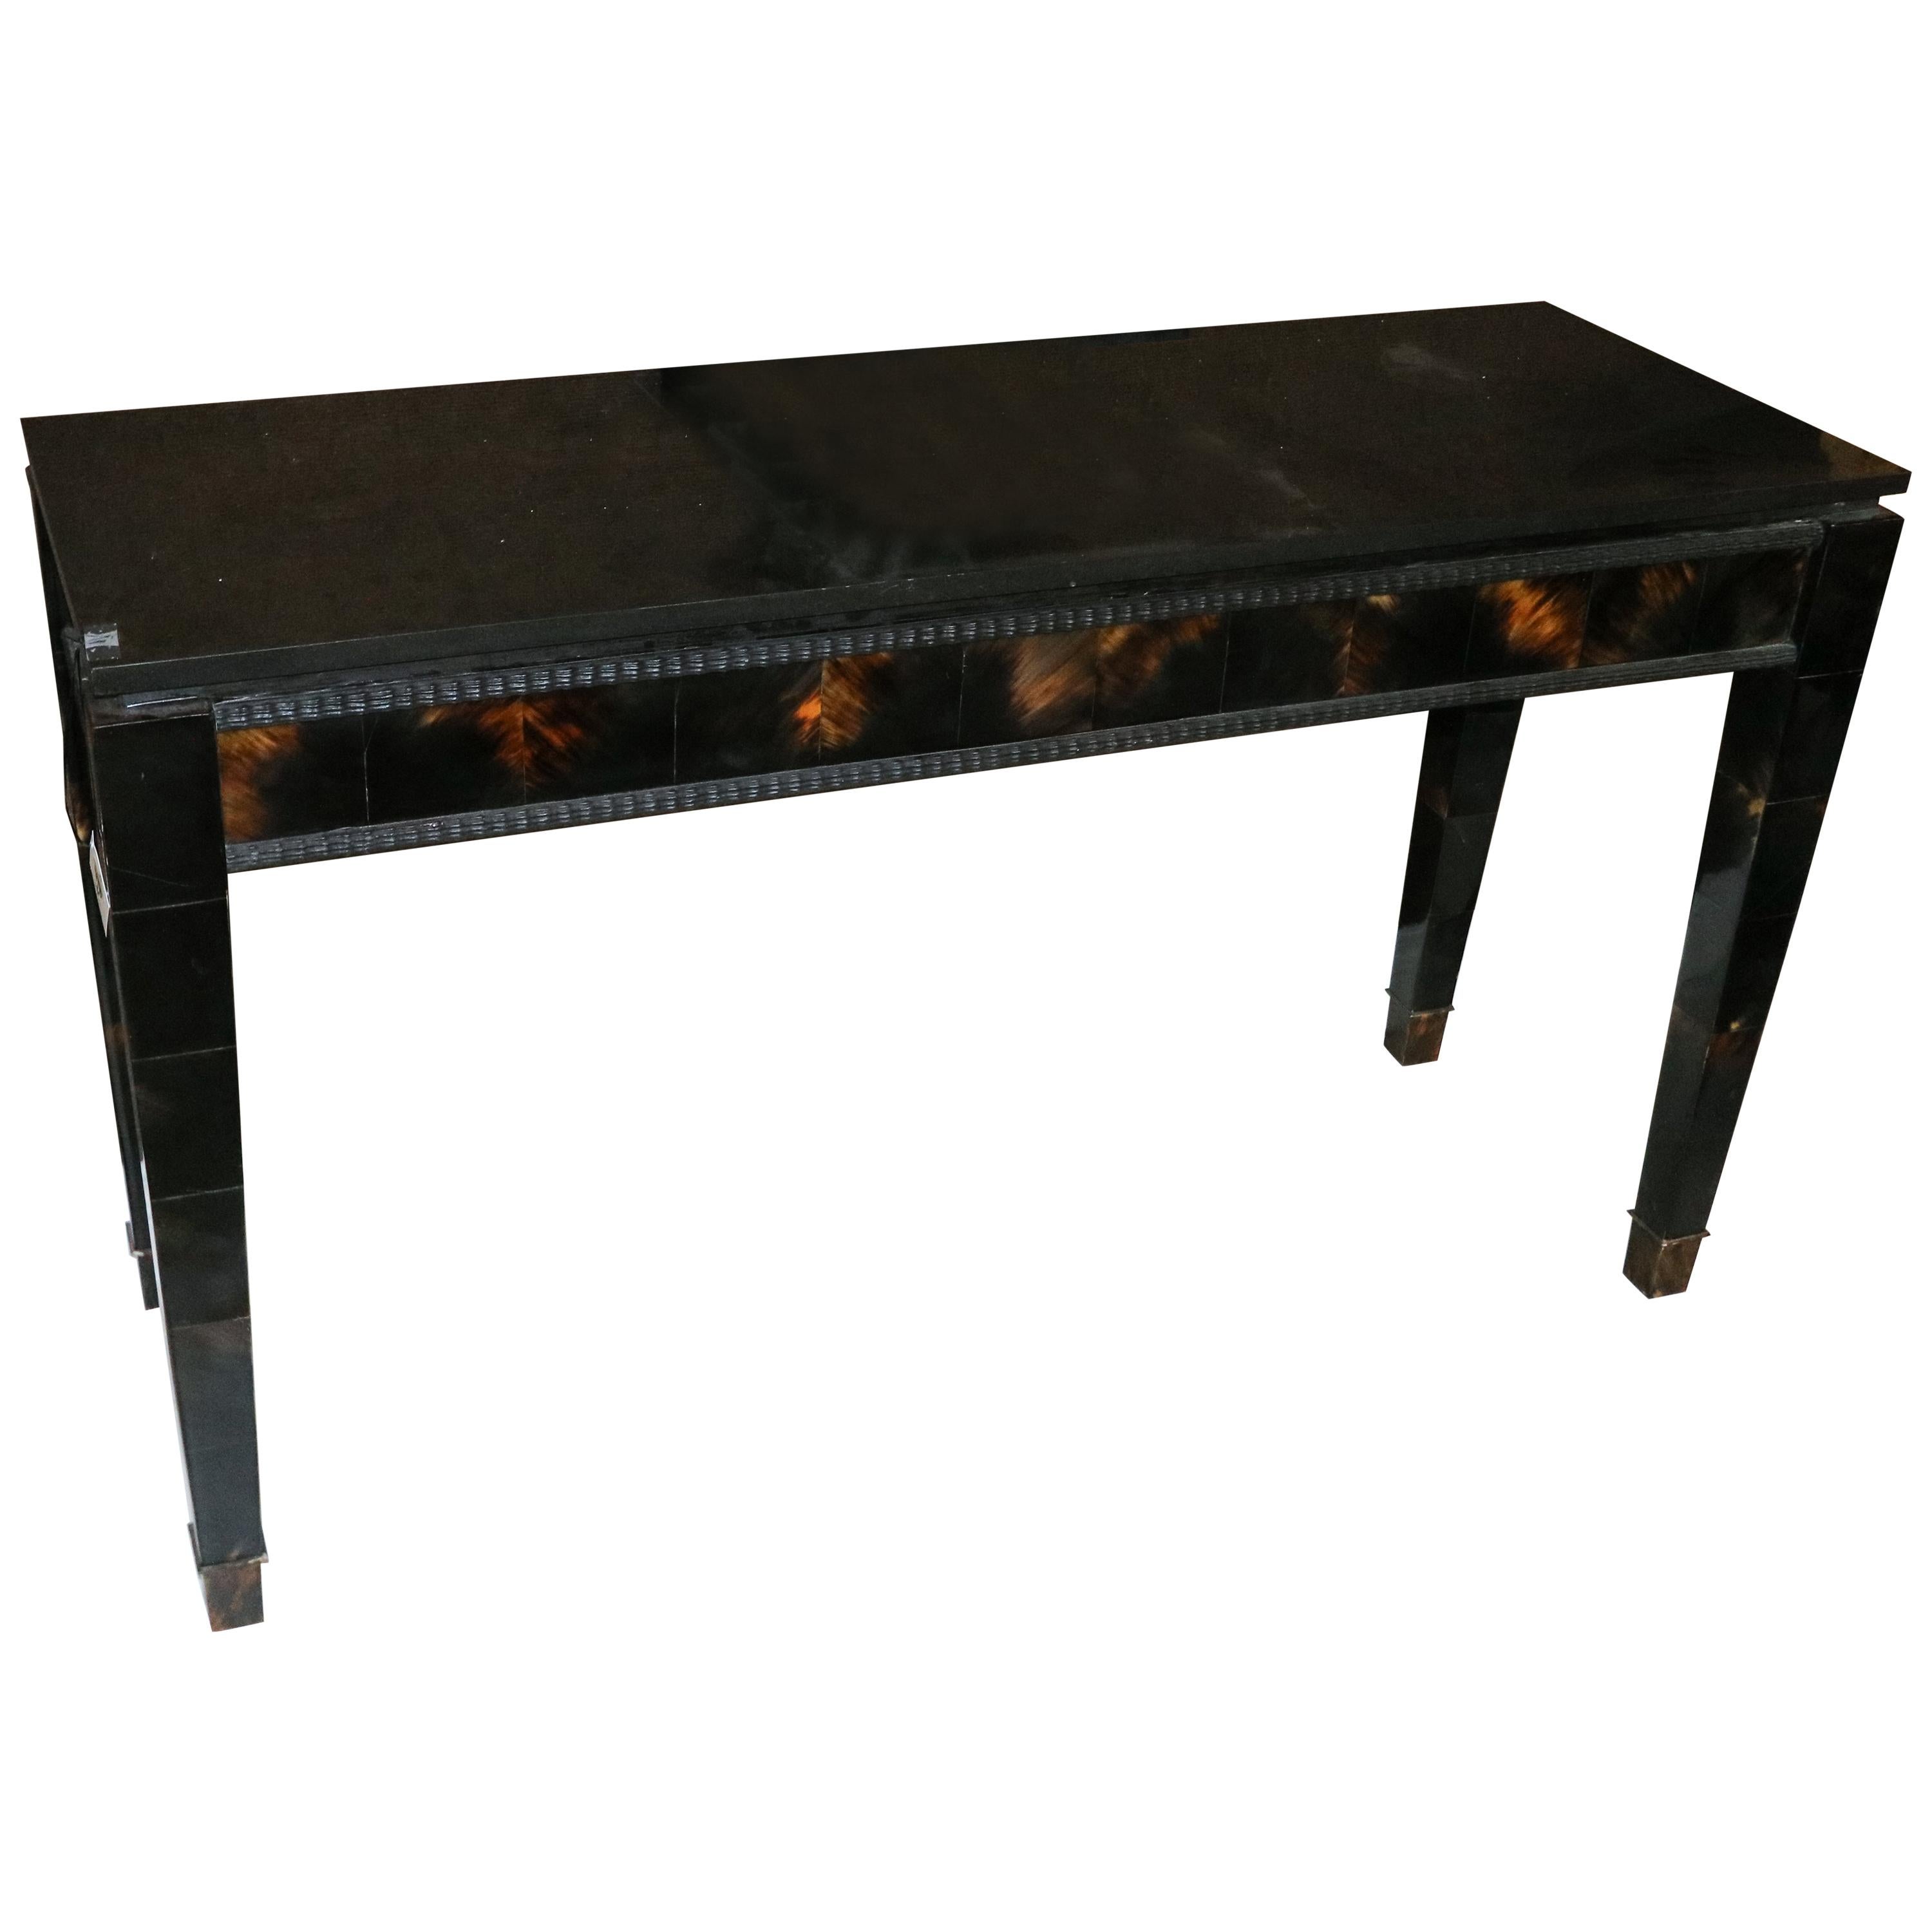 1940s Italian Black Lacquer and Horn Console Table with Marble Top